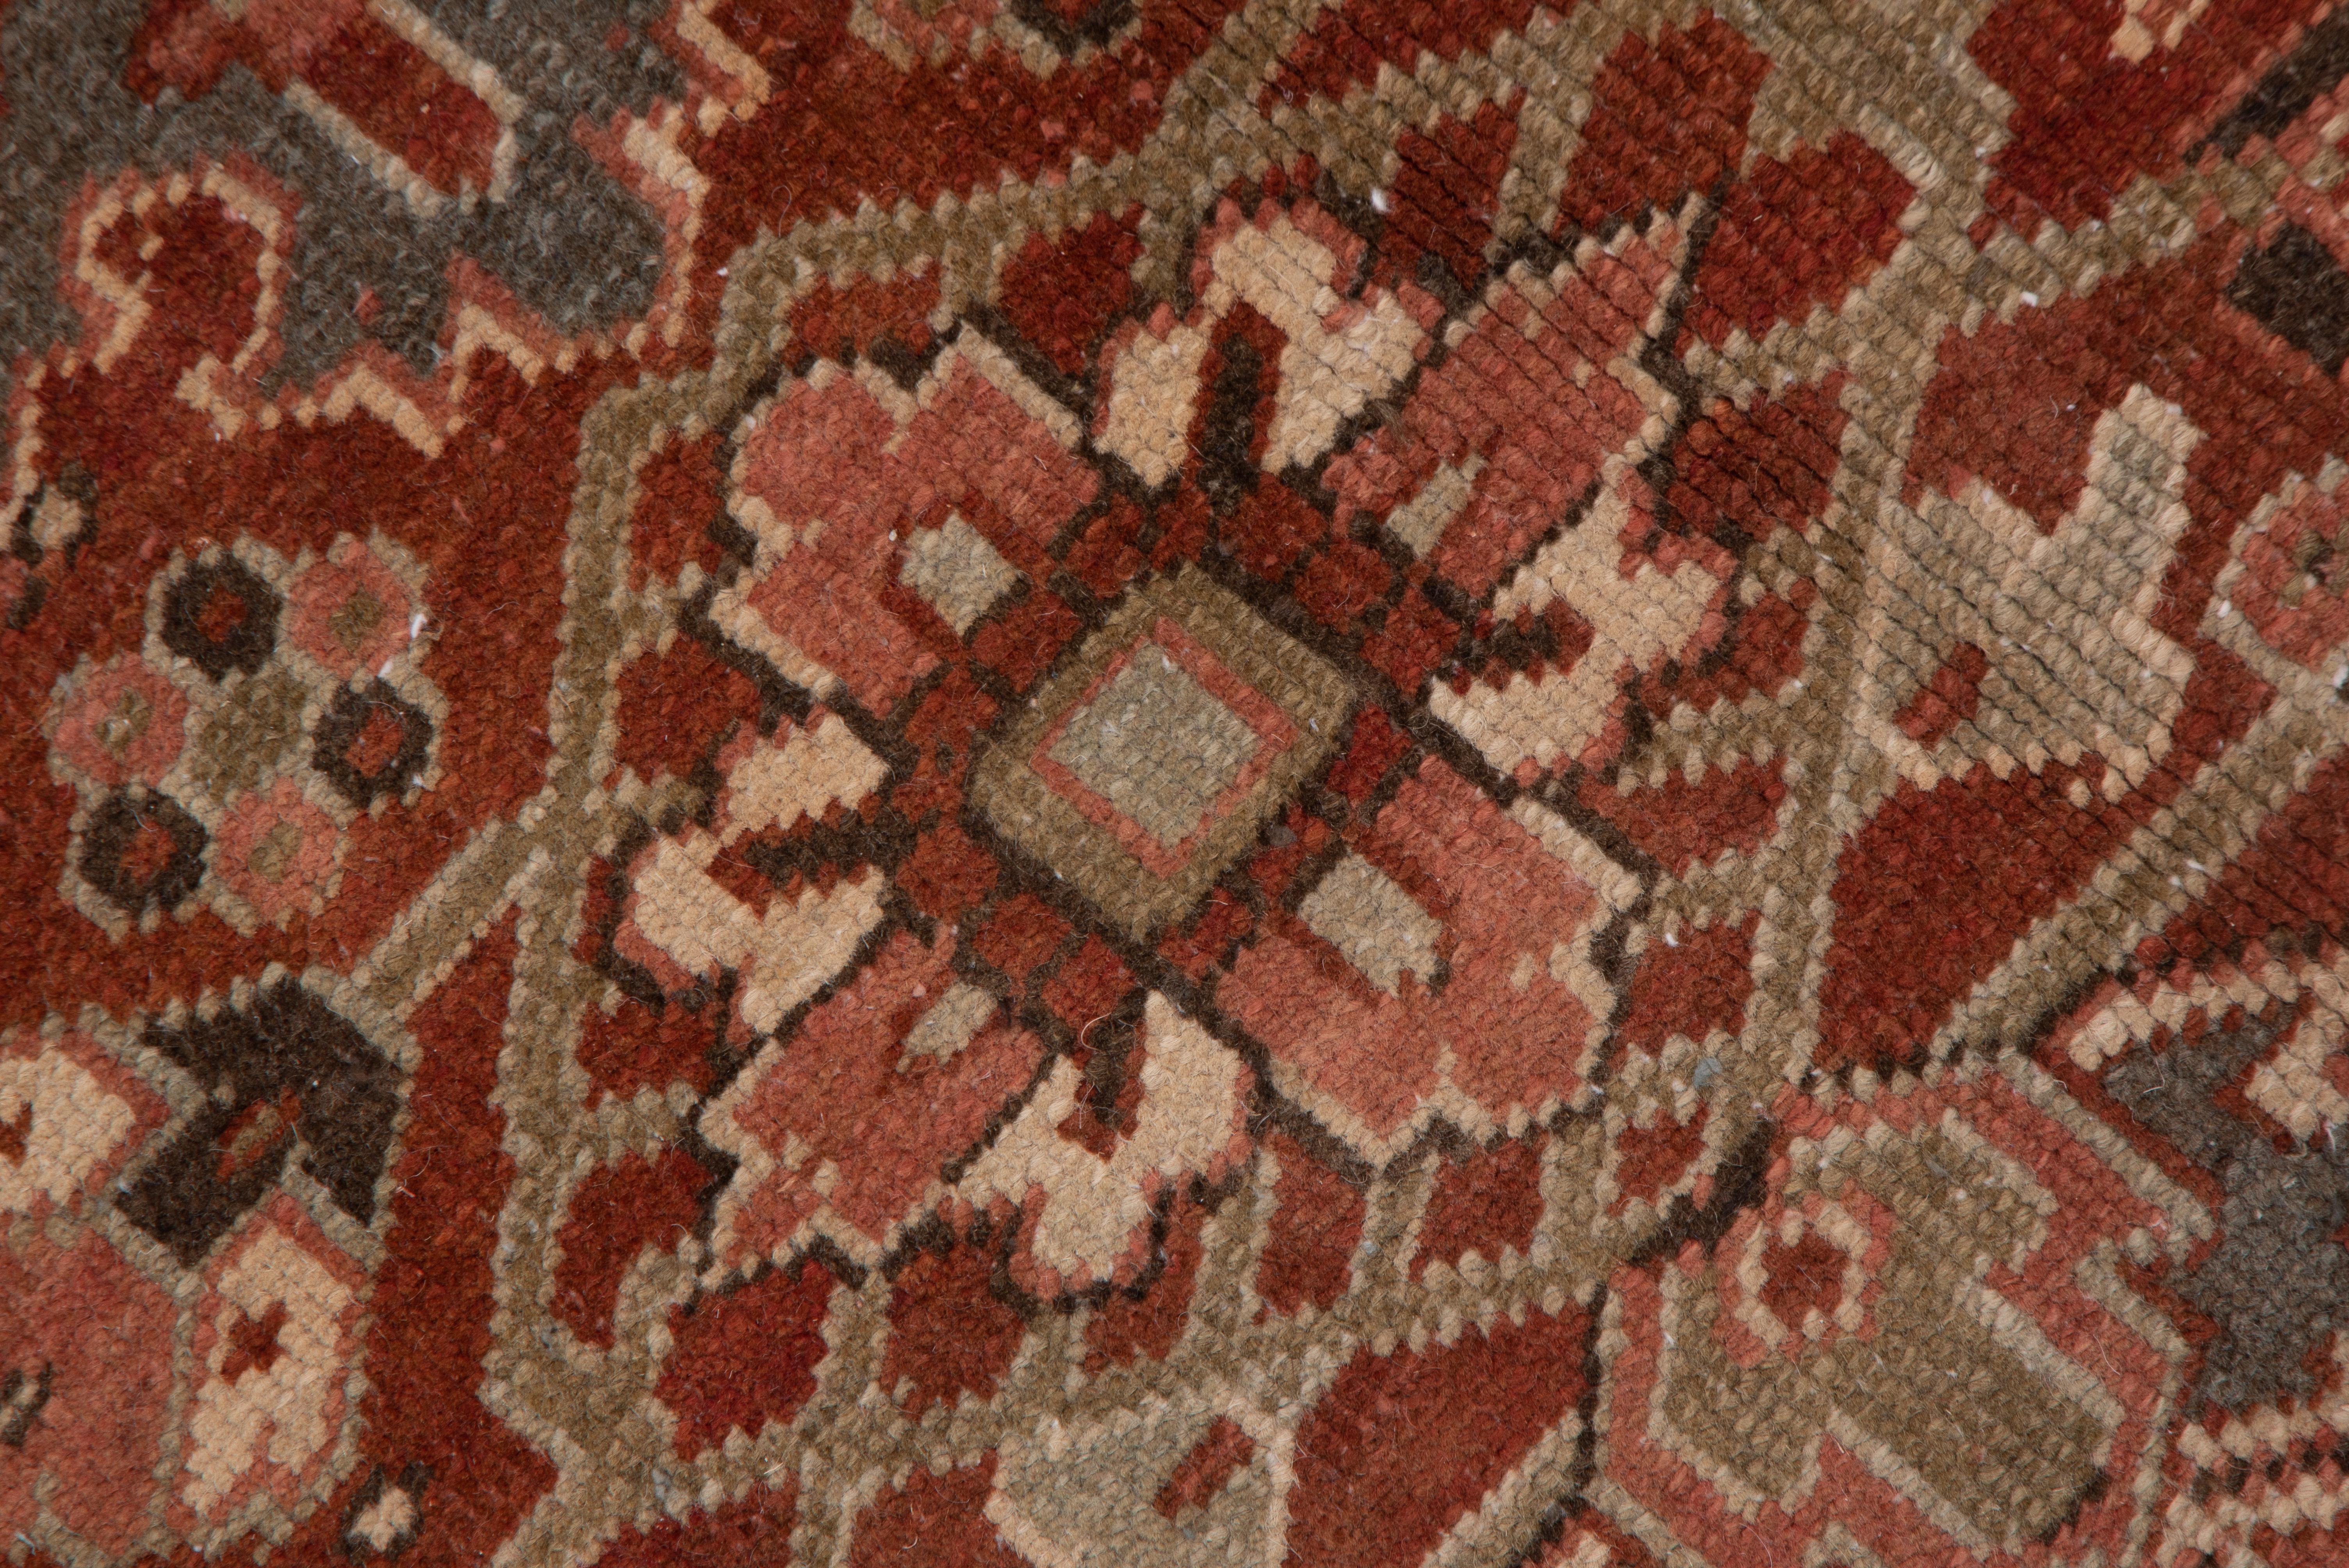 This dark toned NW Persian village carpet presents a well-abrashed green main border with large reversing turtle palmettes which frames the characteristic brownish-red field with a large central cream octogramme medallion and surrounding angular